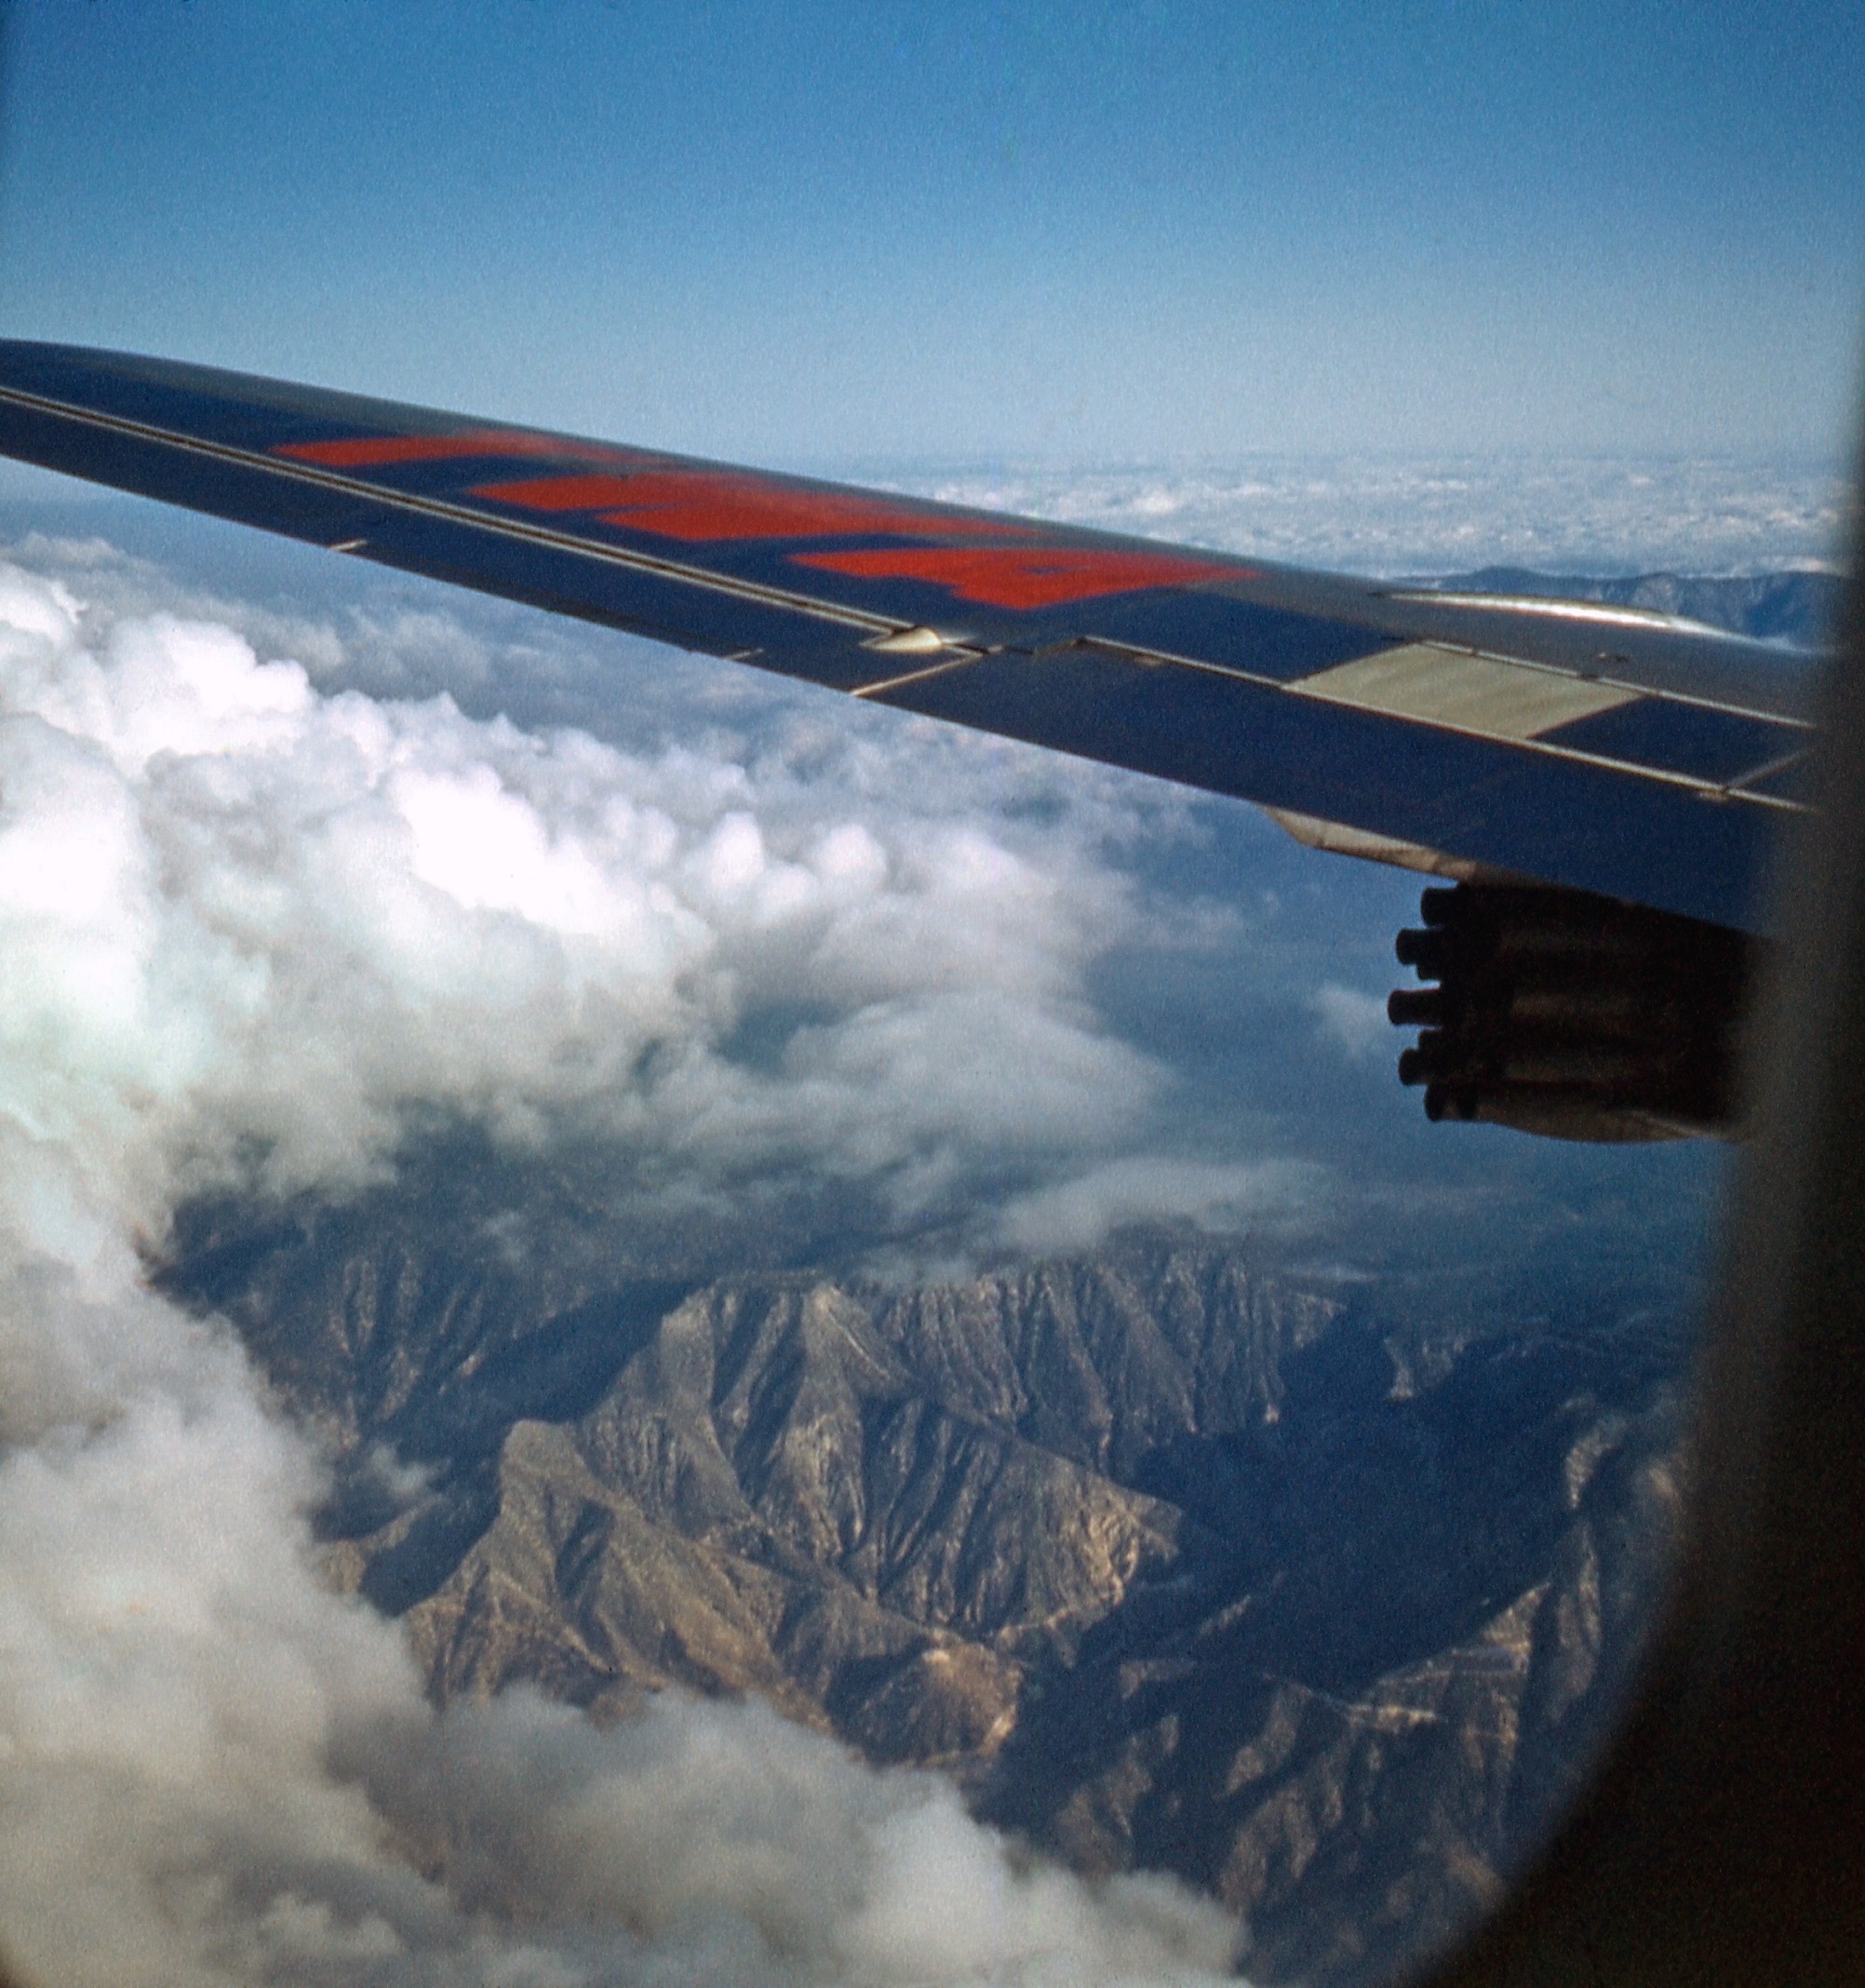 View out the window of a TWA Jet, probably early 60's.
This is from the same collection as the Alhambra Main St. photos. The terrain looks like Southern California. View full size.